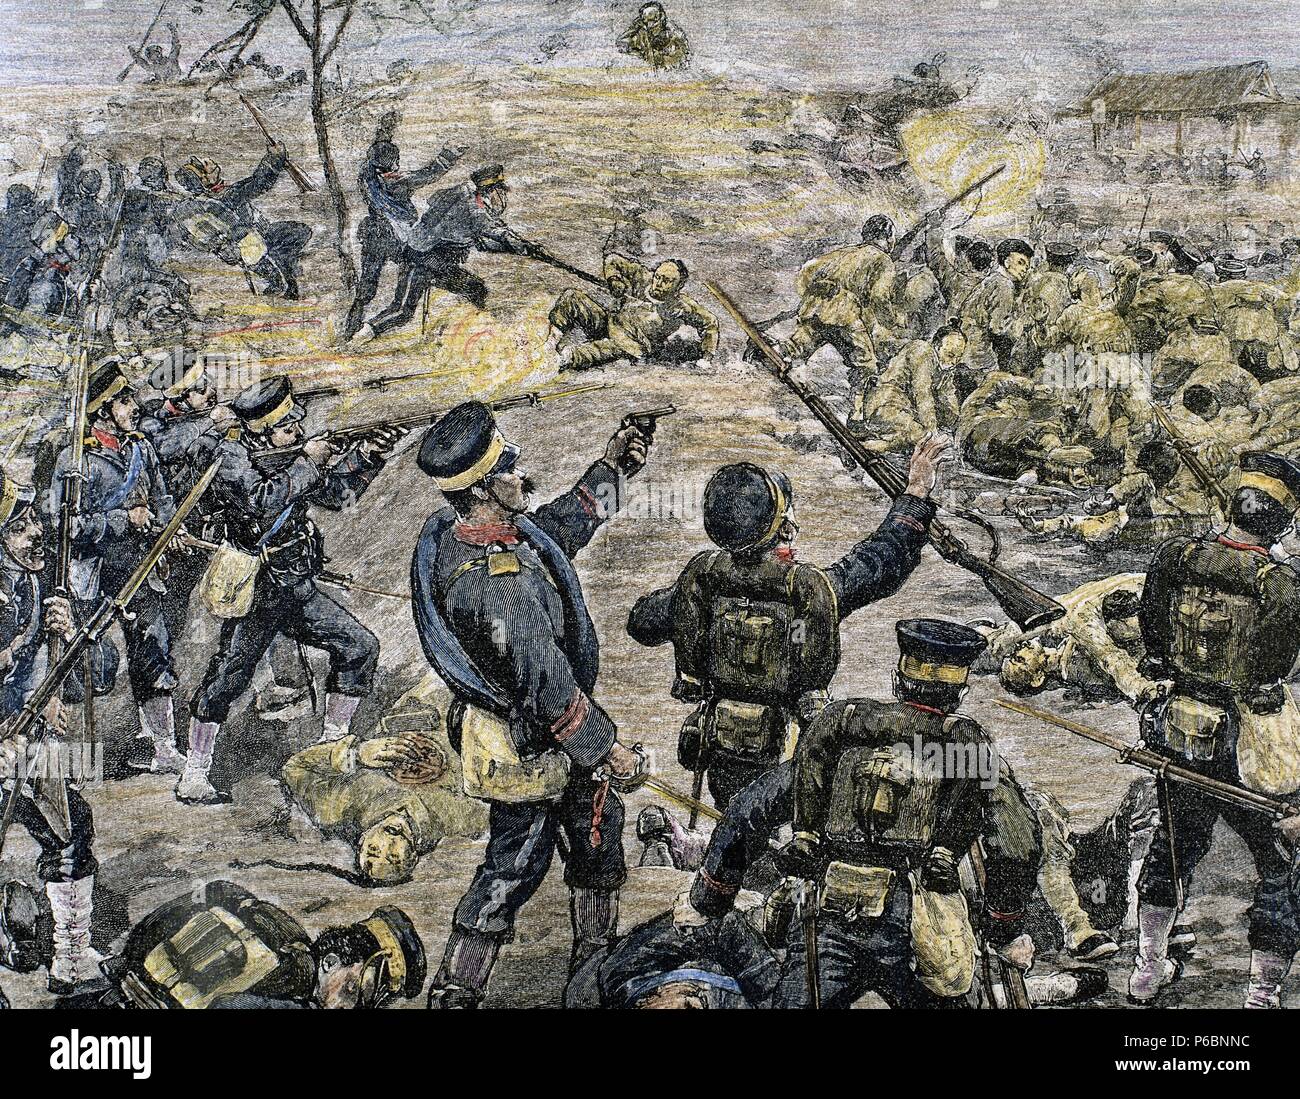 First Sino-Japanese War (1894-1895). Battle of Ping-Yang (September 15, 1894). The Japanese take a Chinese position. Colored engraving. Stock Photo